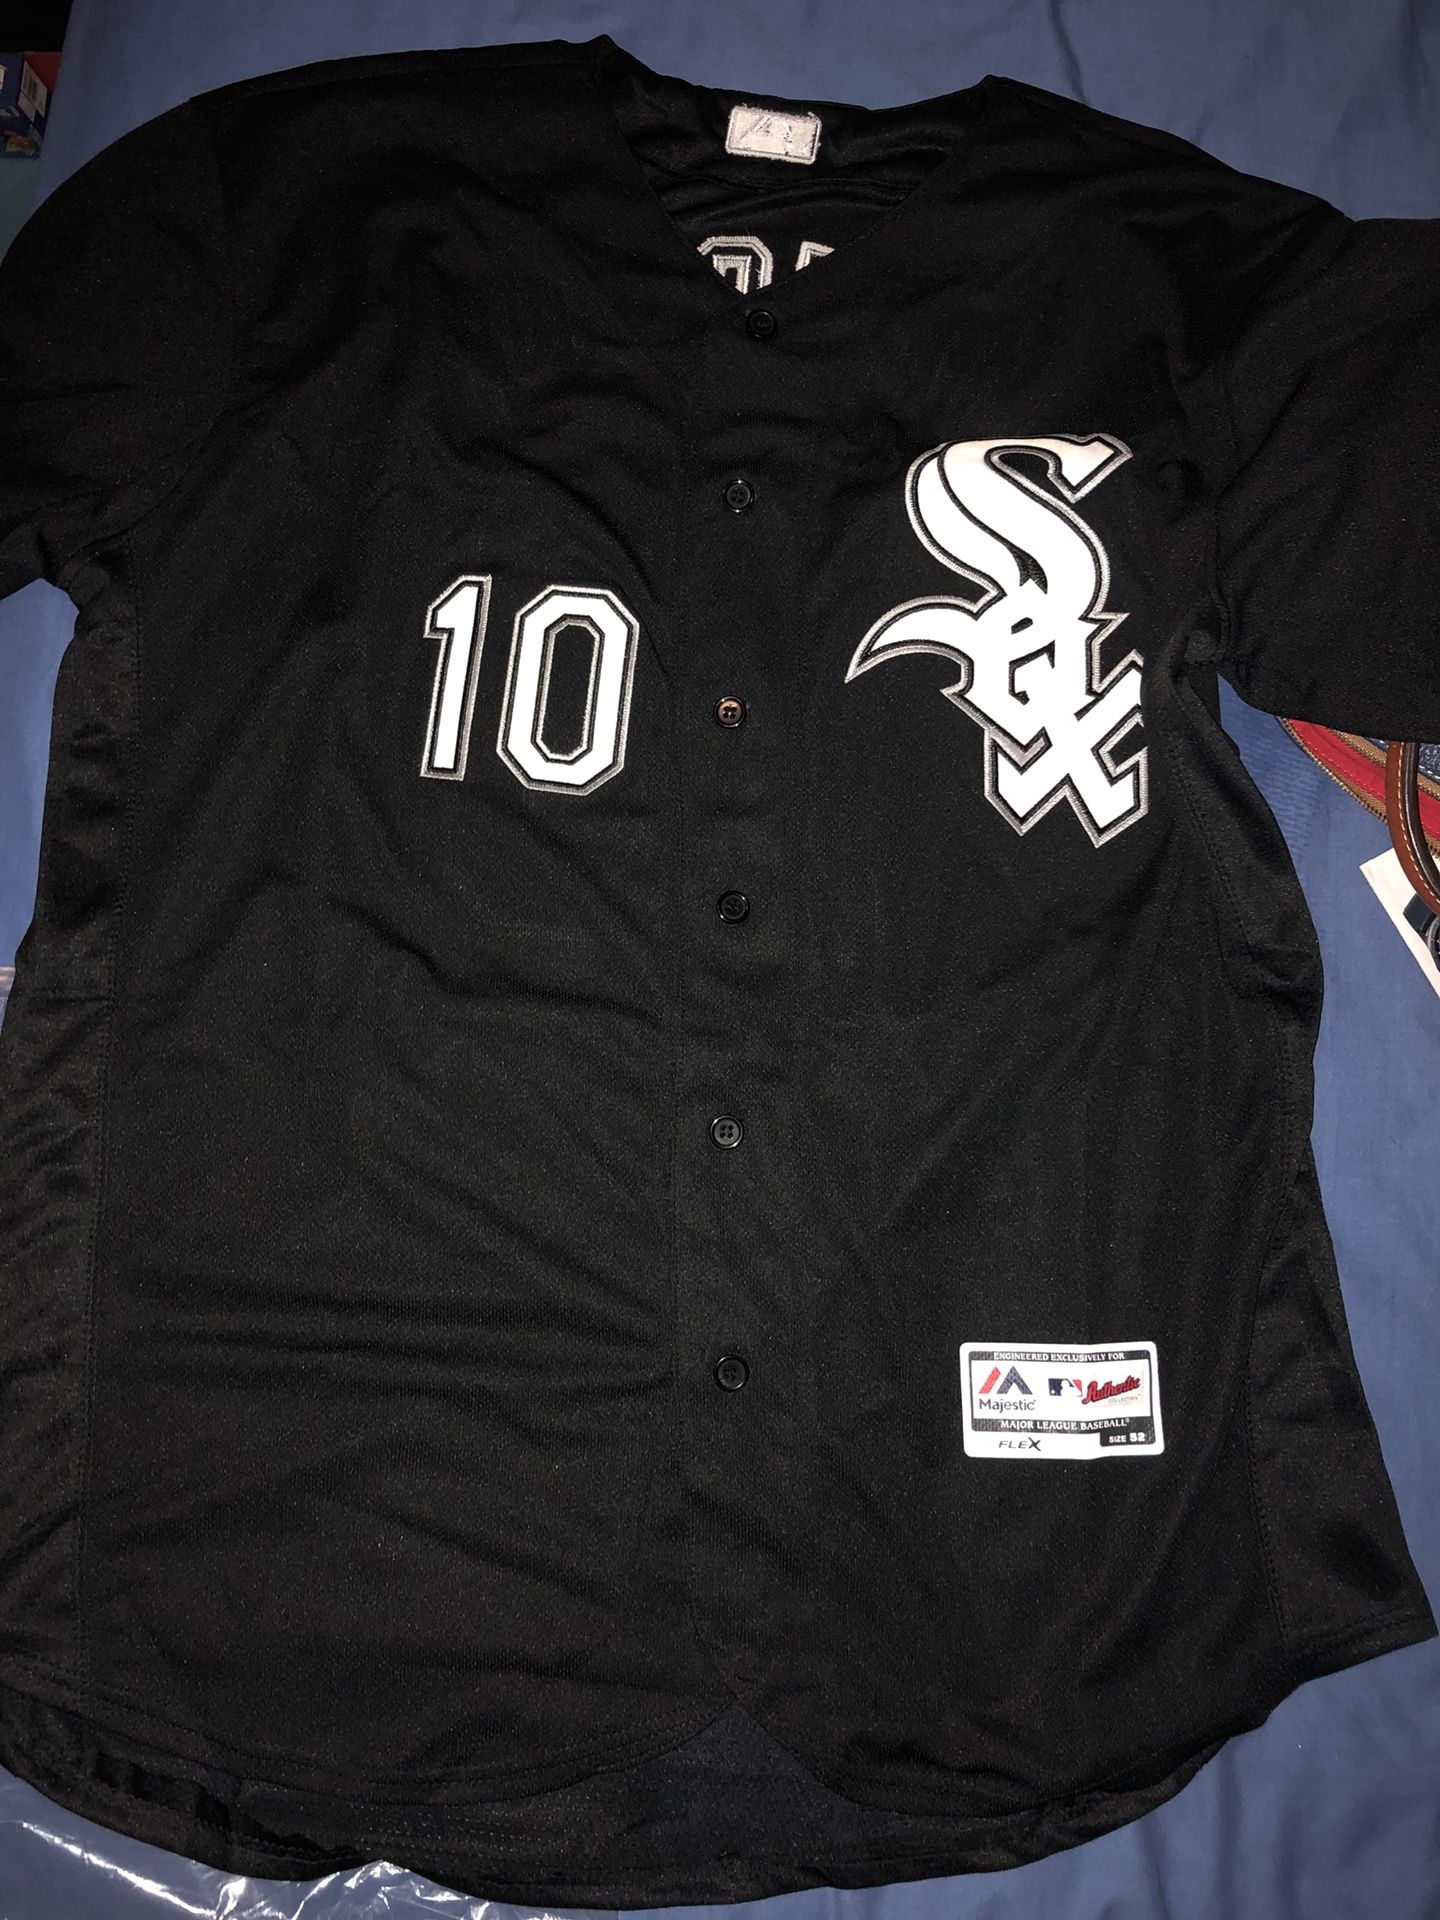 White Sox Moncada Jersey for Sale in Joliet, IL - OfferUp